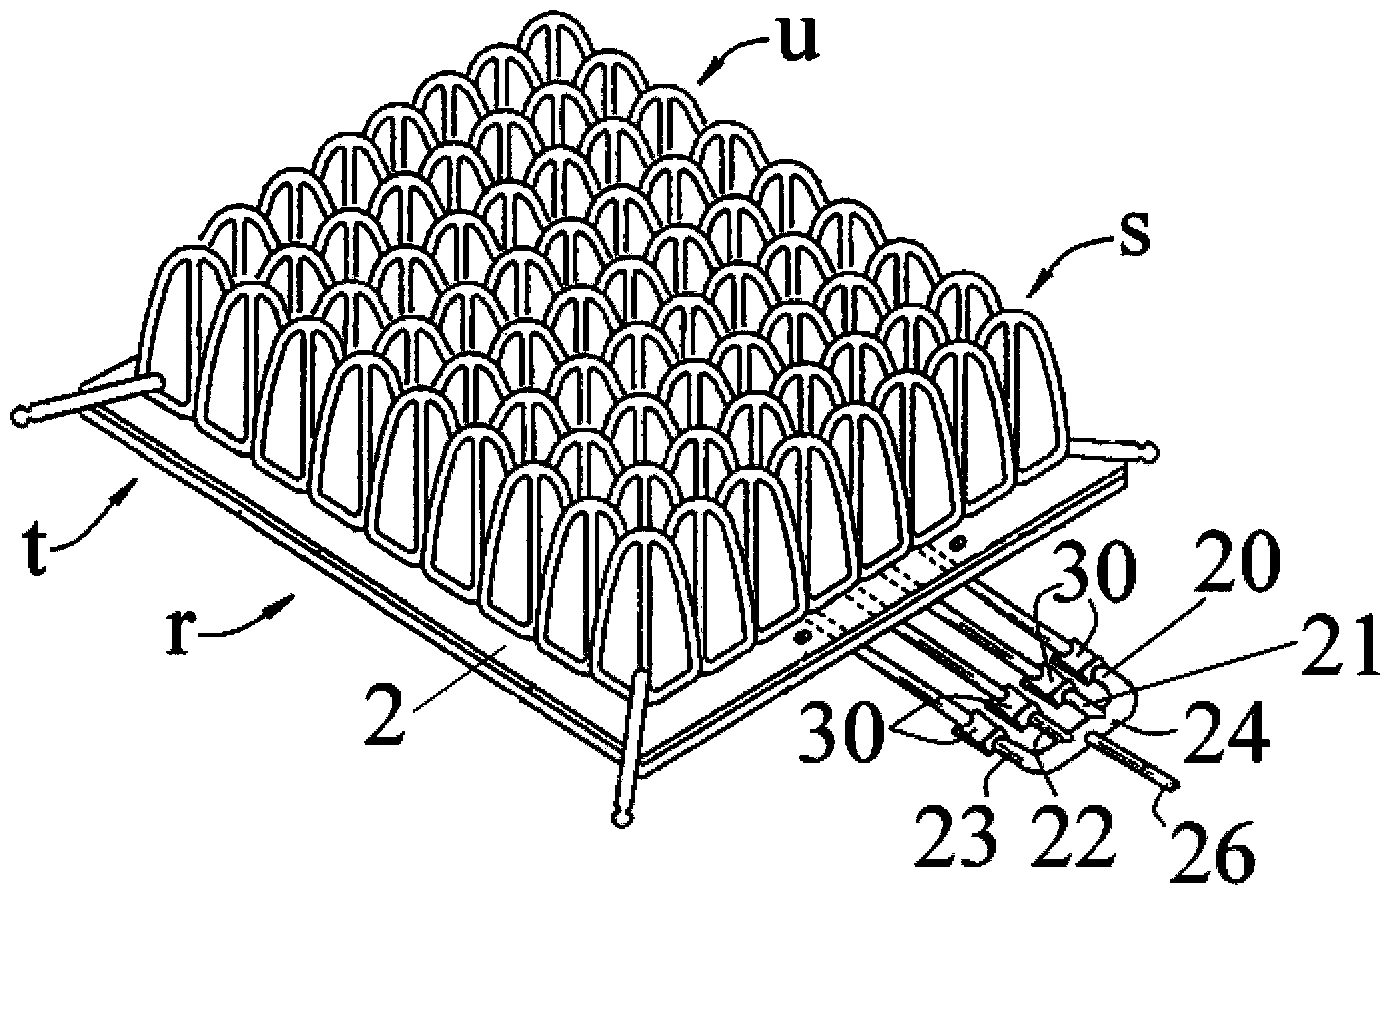 Pressure-sore-preventing cushion capable of automatically regulating pressure